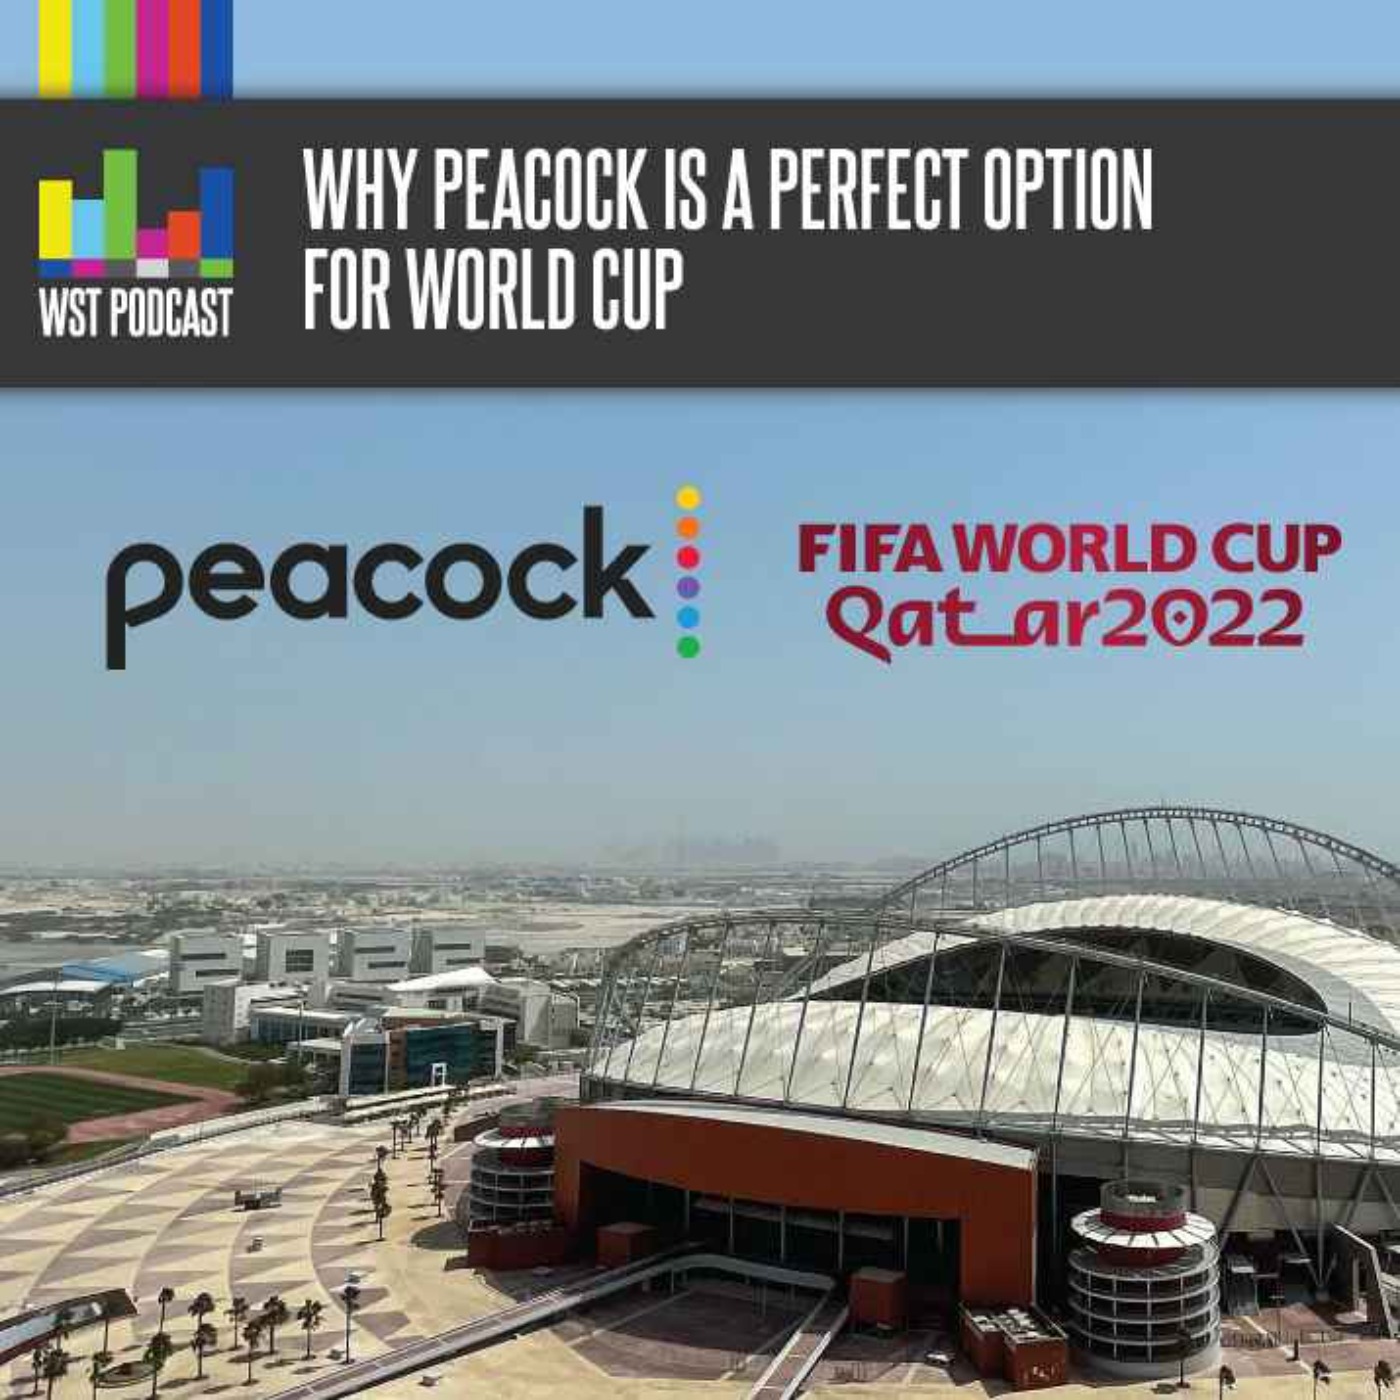 Why Peacock is a worthy World Cup viewing option